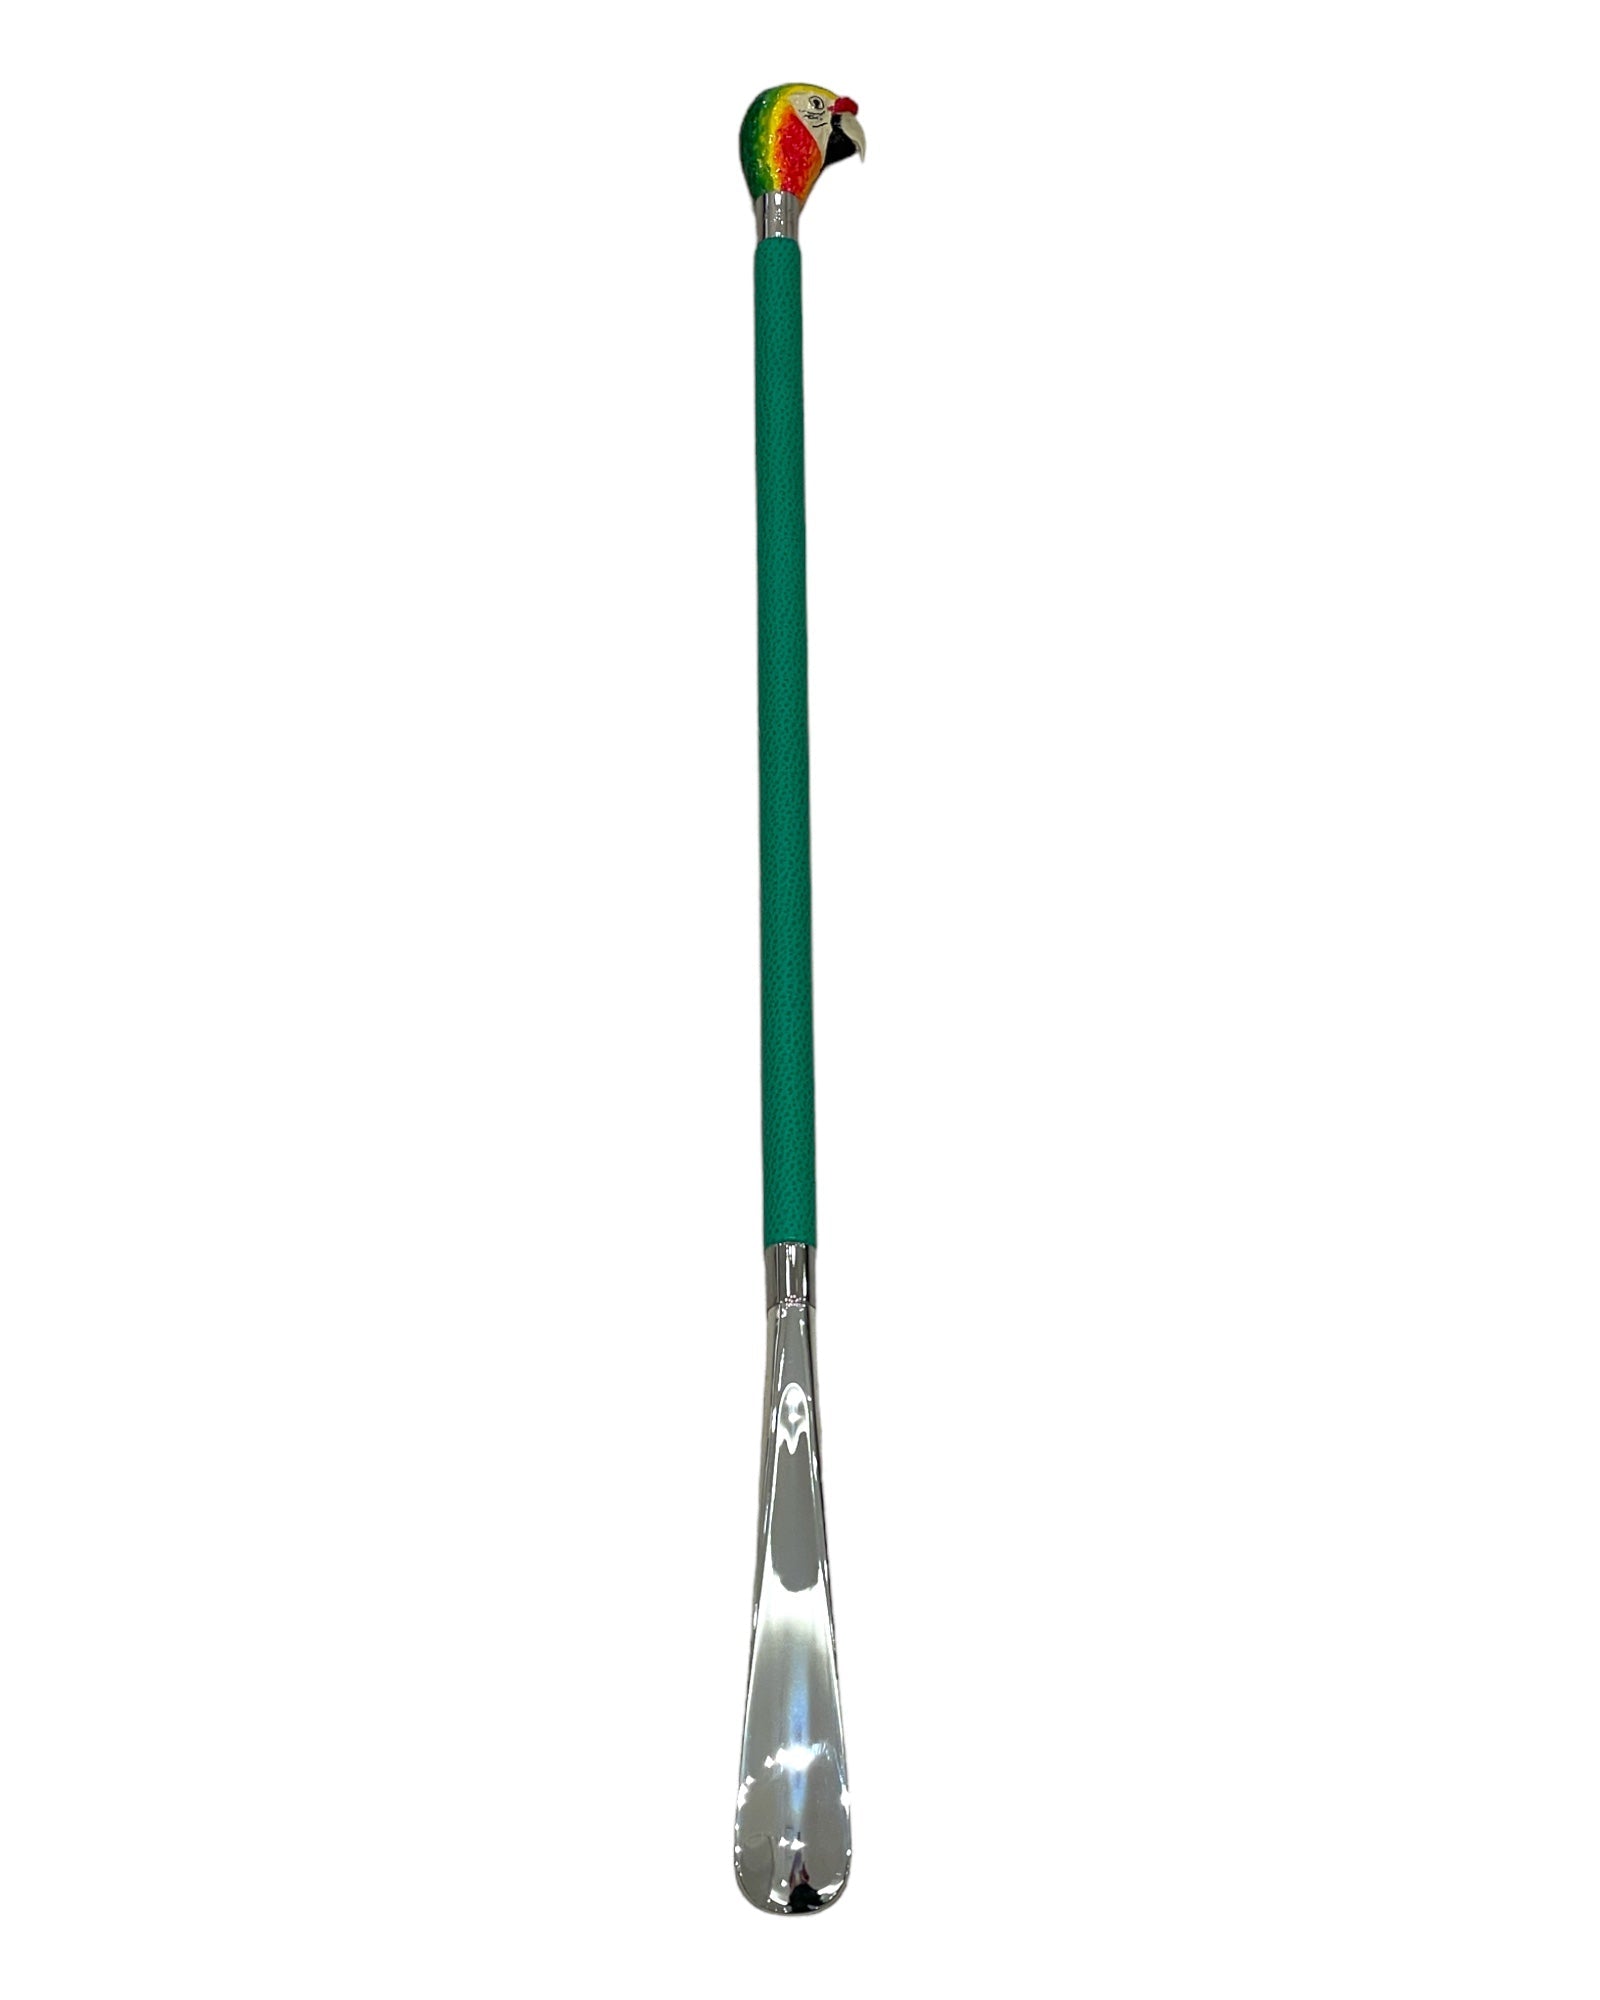 Parrot Long Shoehorn - Green Leather Shaft/Yellow Stitches SHOEHORN